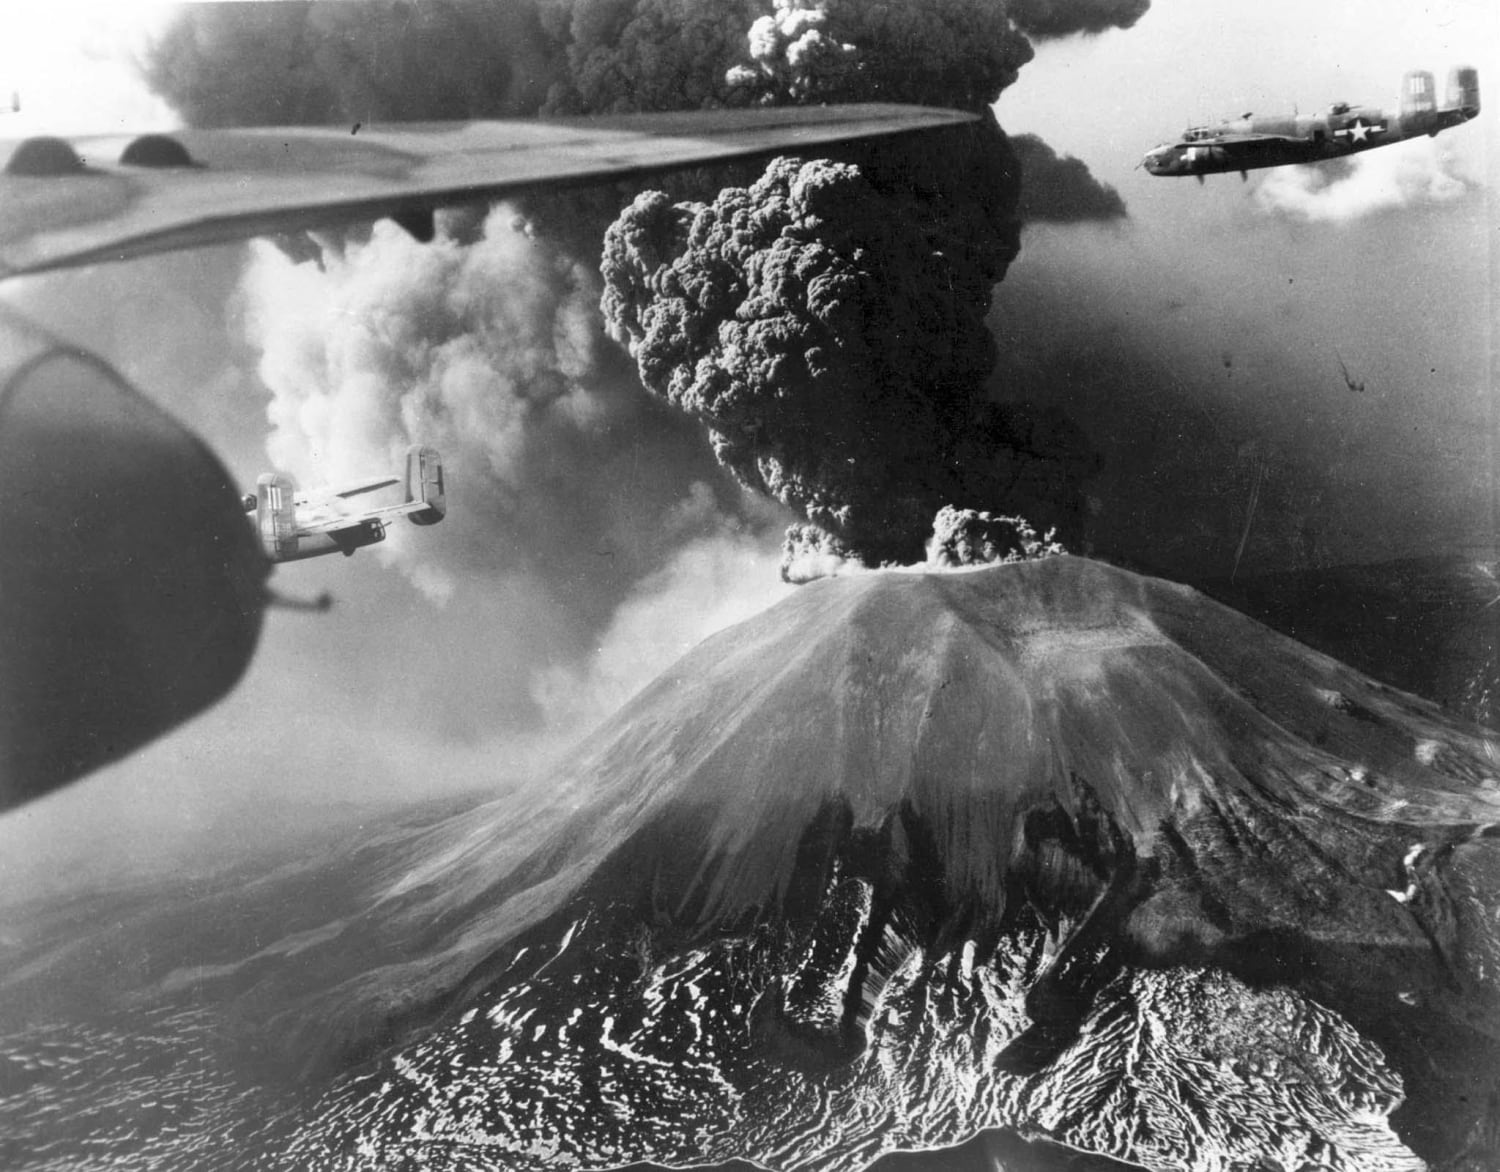 Capturing Vesuvius eruption from a bomber during WW2